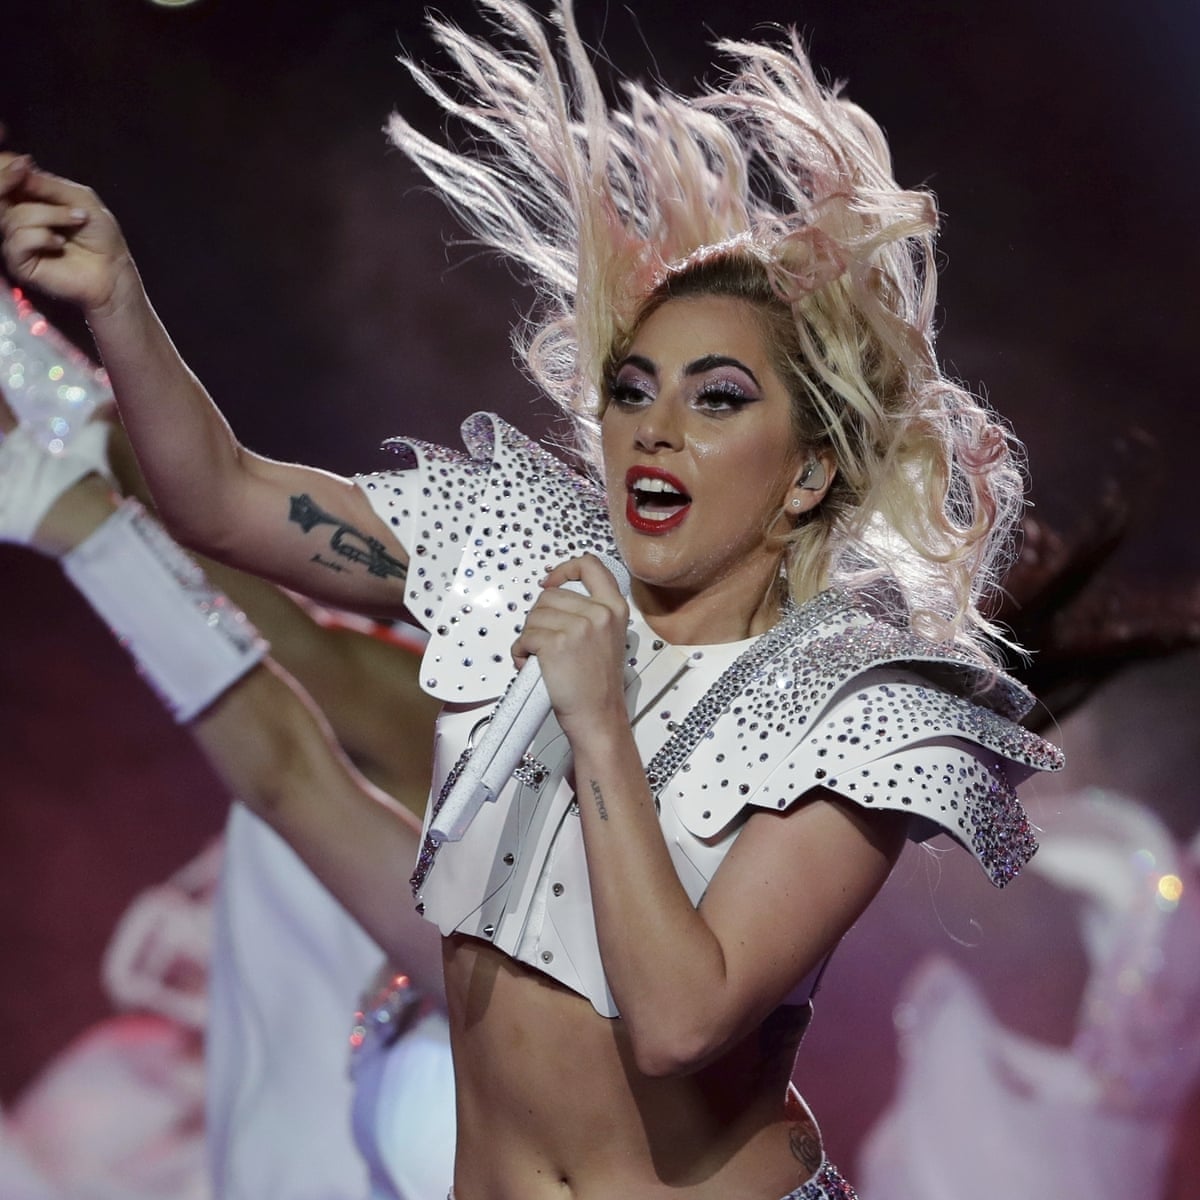 Fibromyalgia The Pain Behind Lady Gaga S Poker Face Science The Guardian